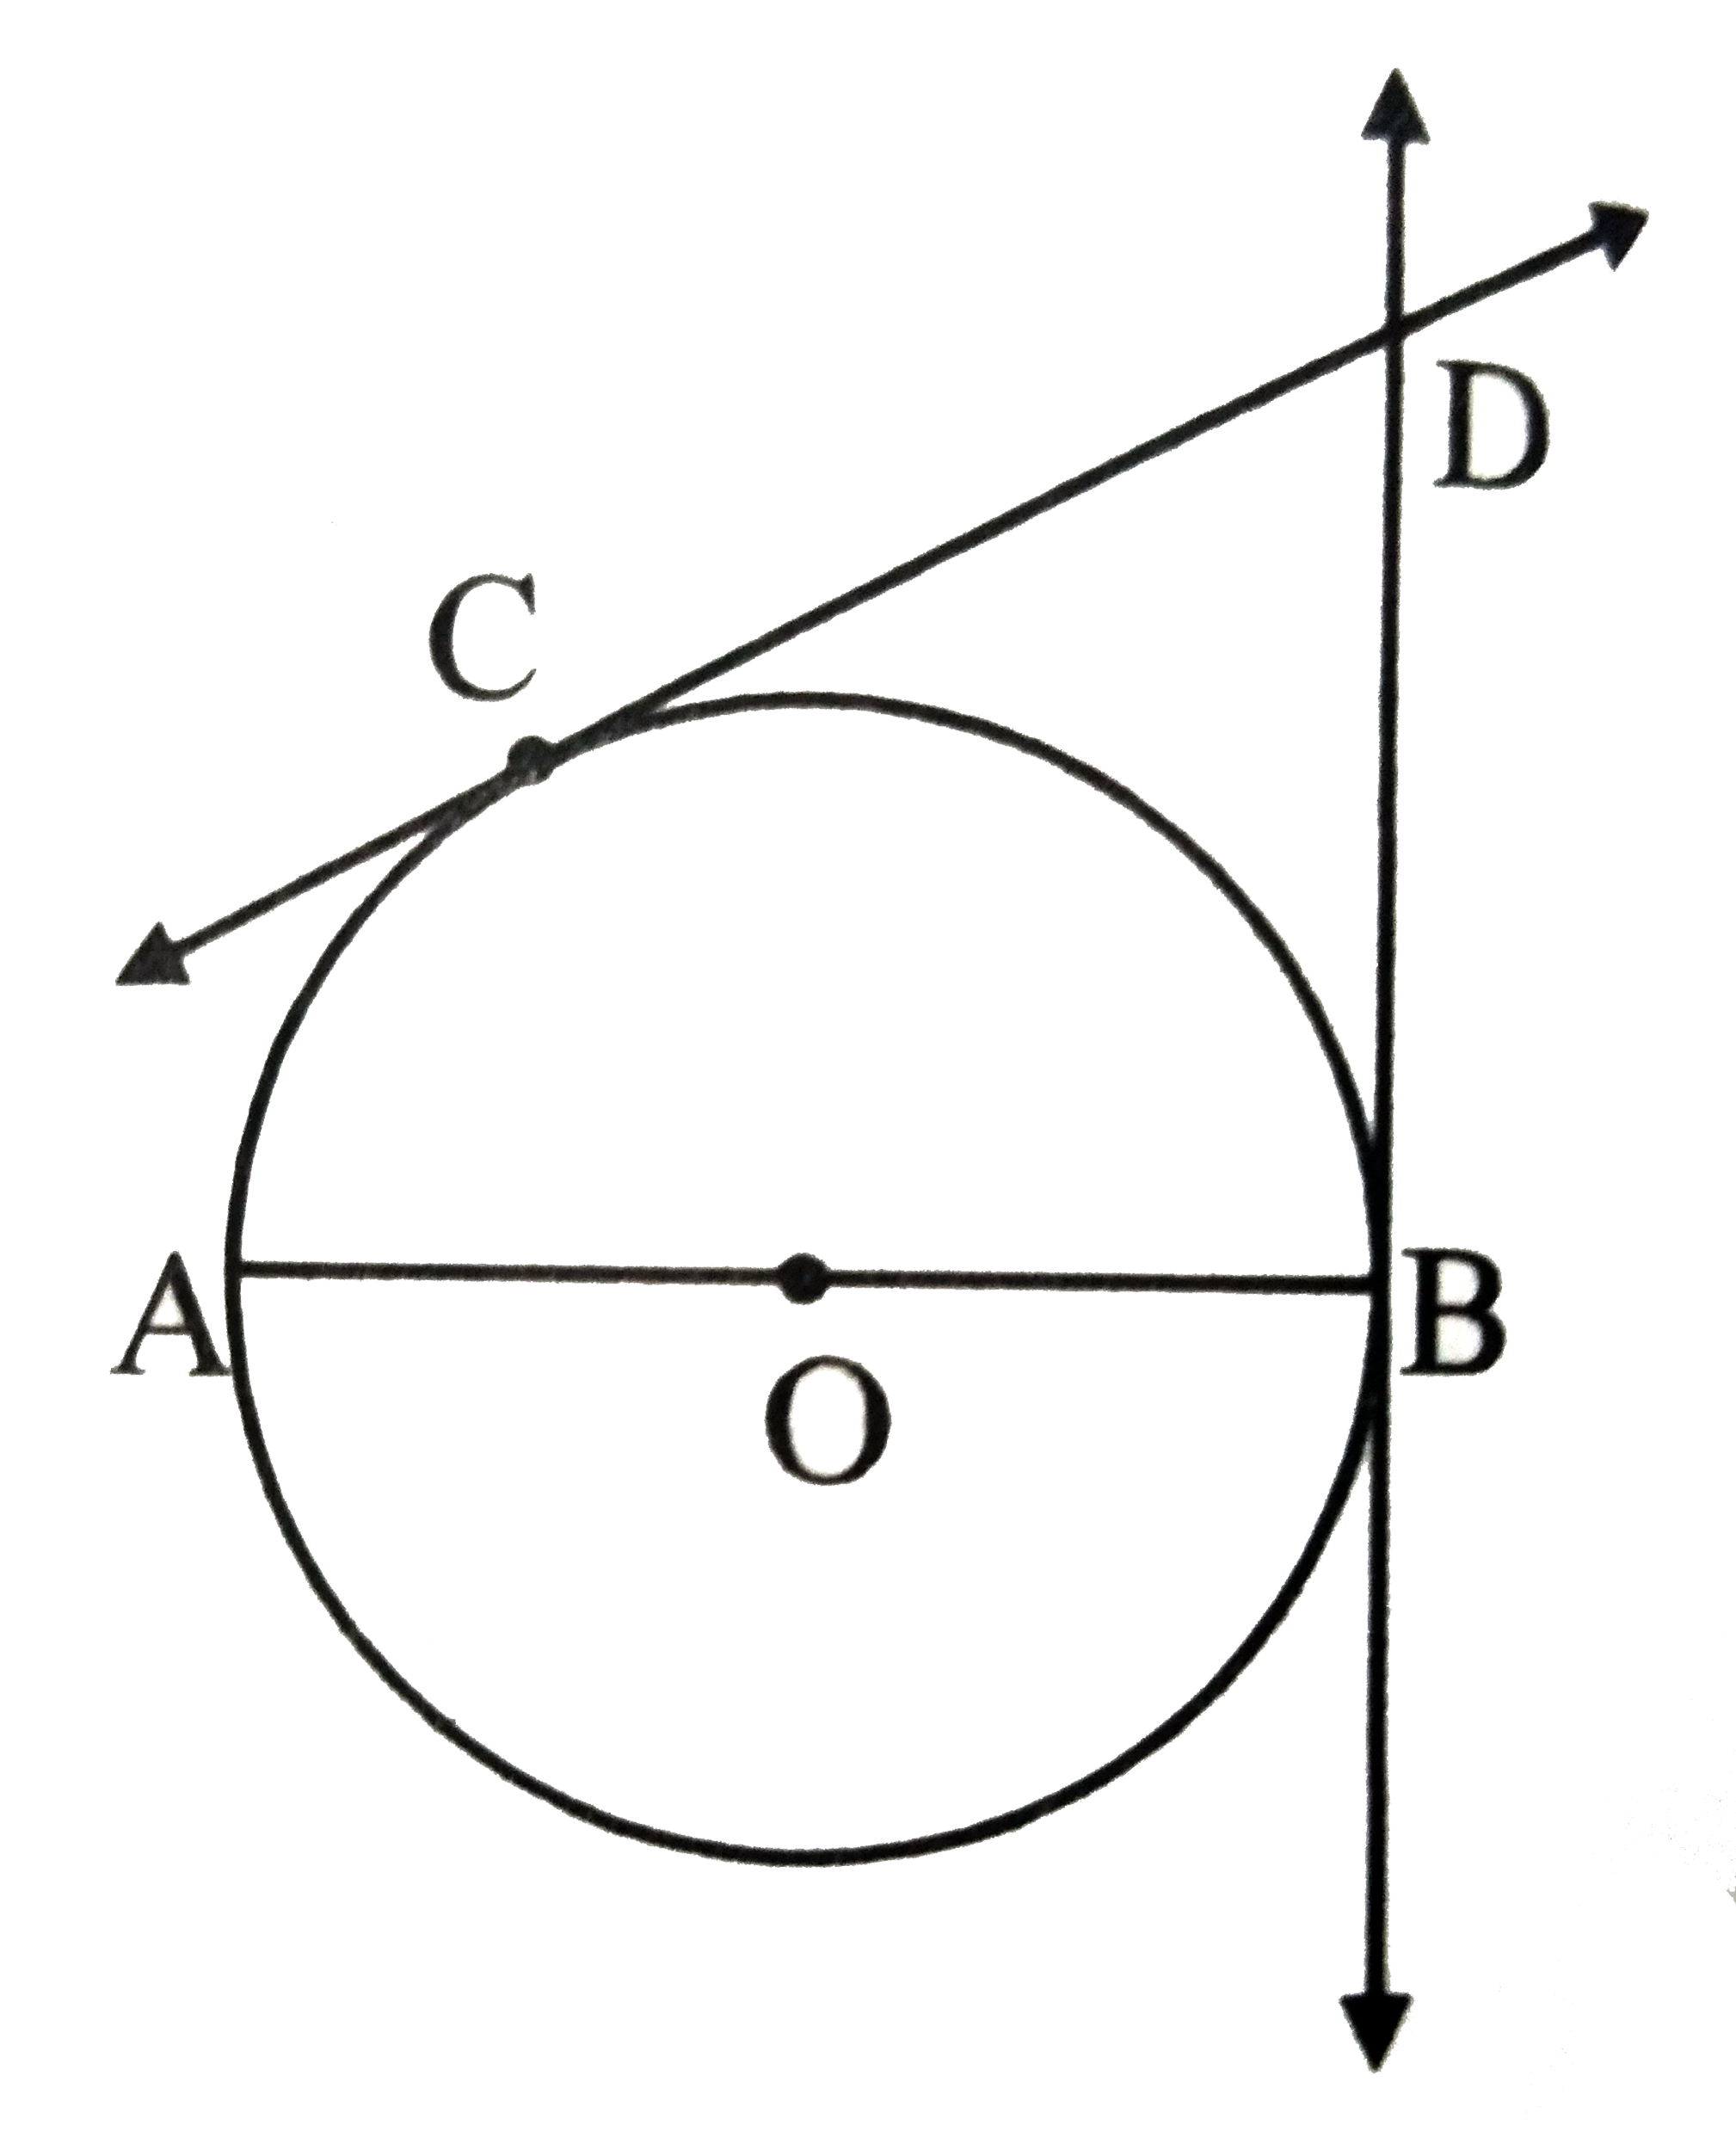 In the adjoining figure, O is the centre and seg AB is a diameter. At the point C on the circle, the tangent CD is drawn. Line BD is a tangent to the circle at the point B. Show that segOD || chord AC.